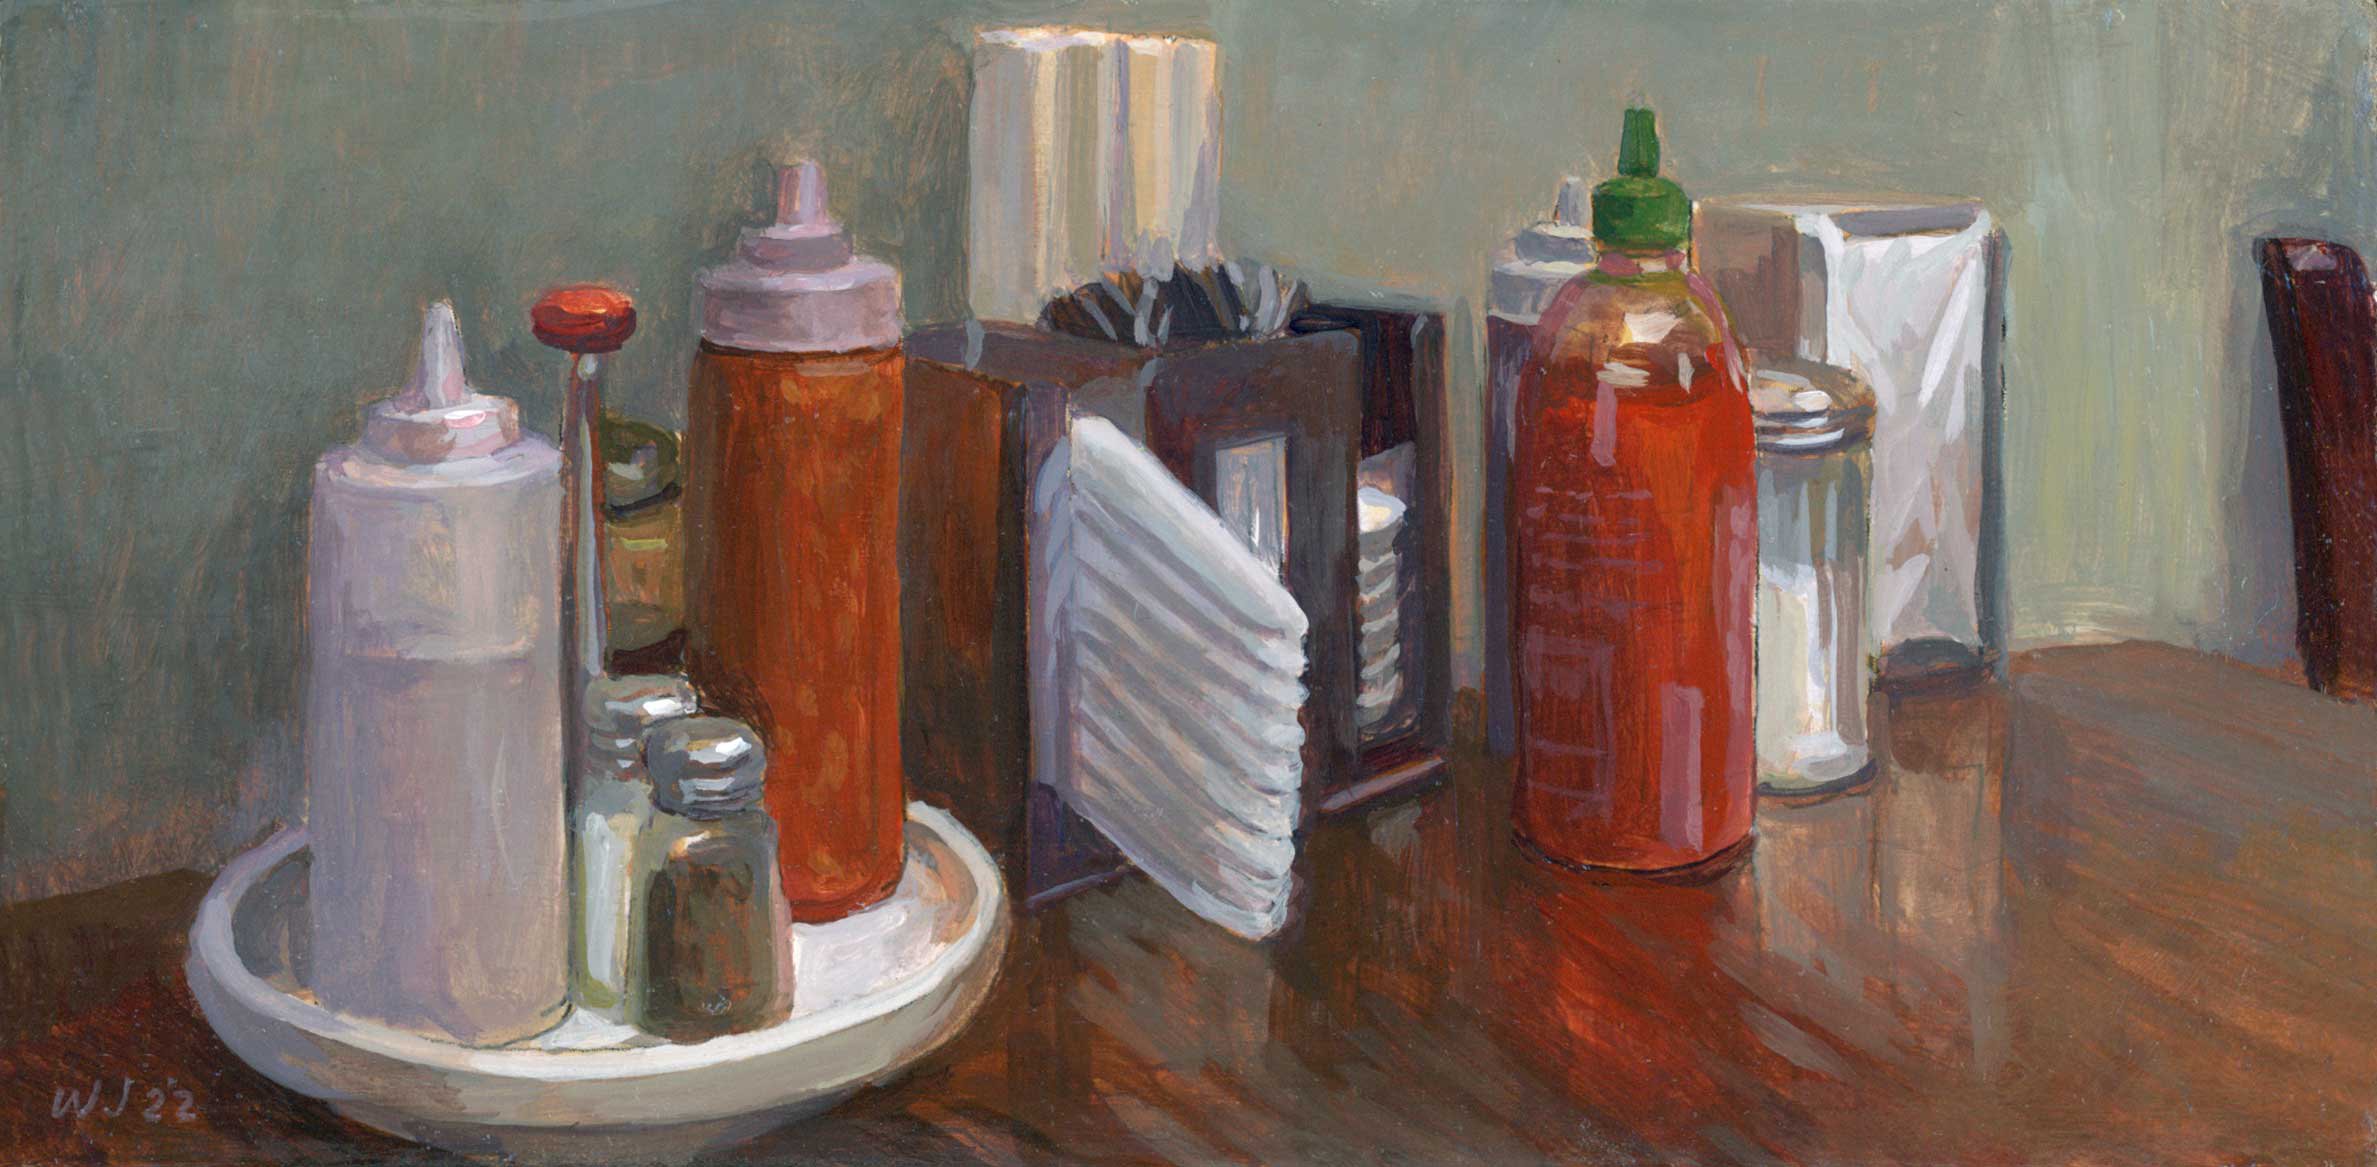 Noodle Condiments and Utensils by Wayne Jiang